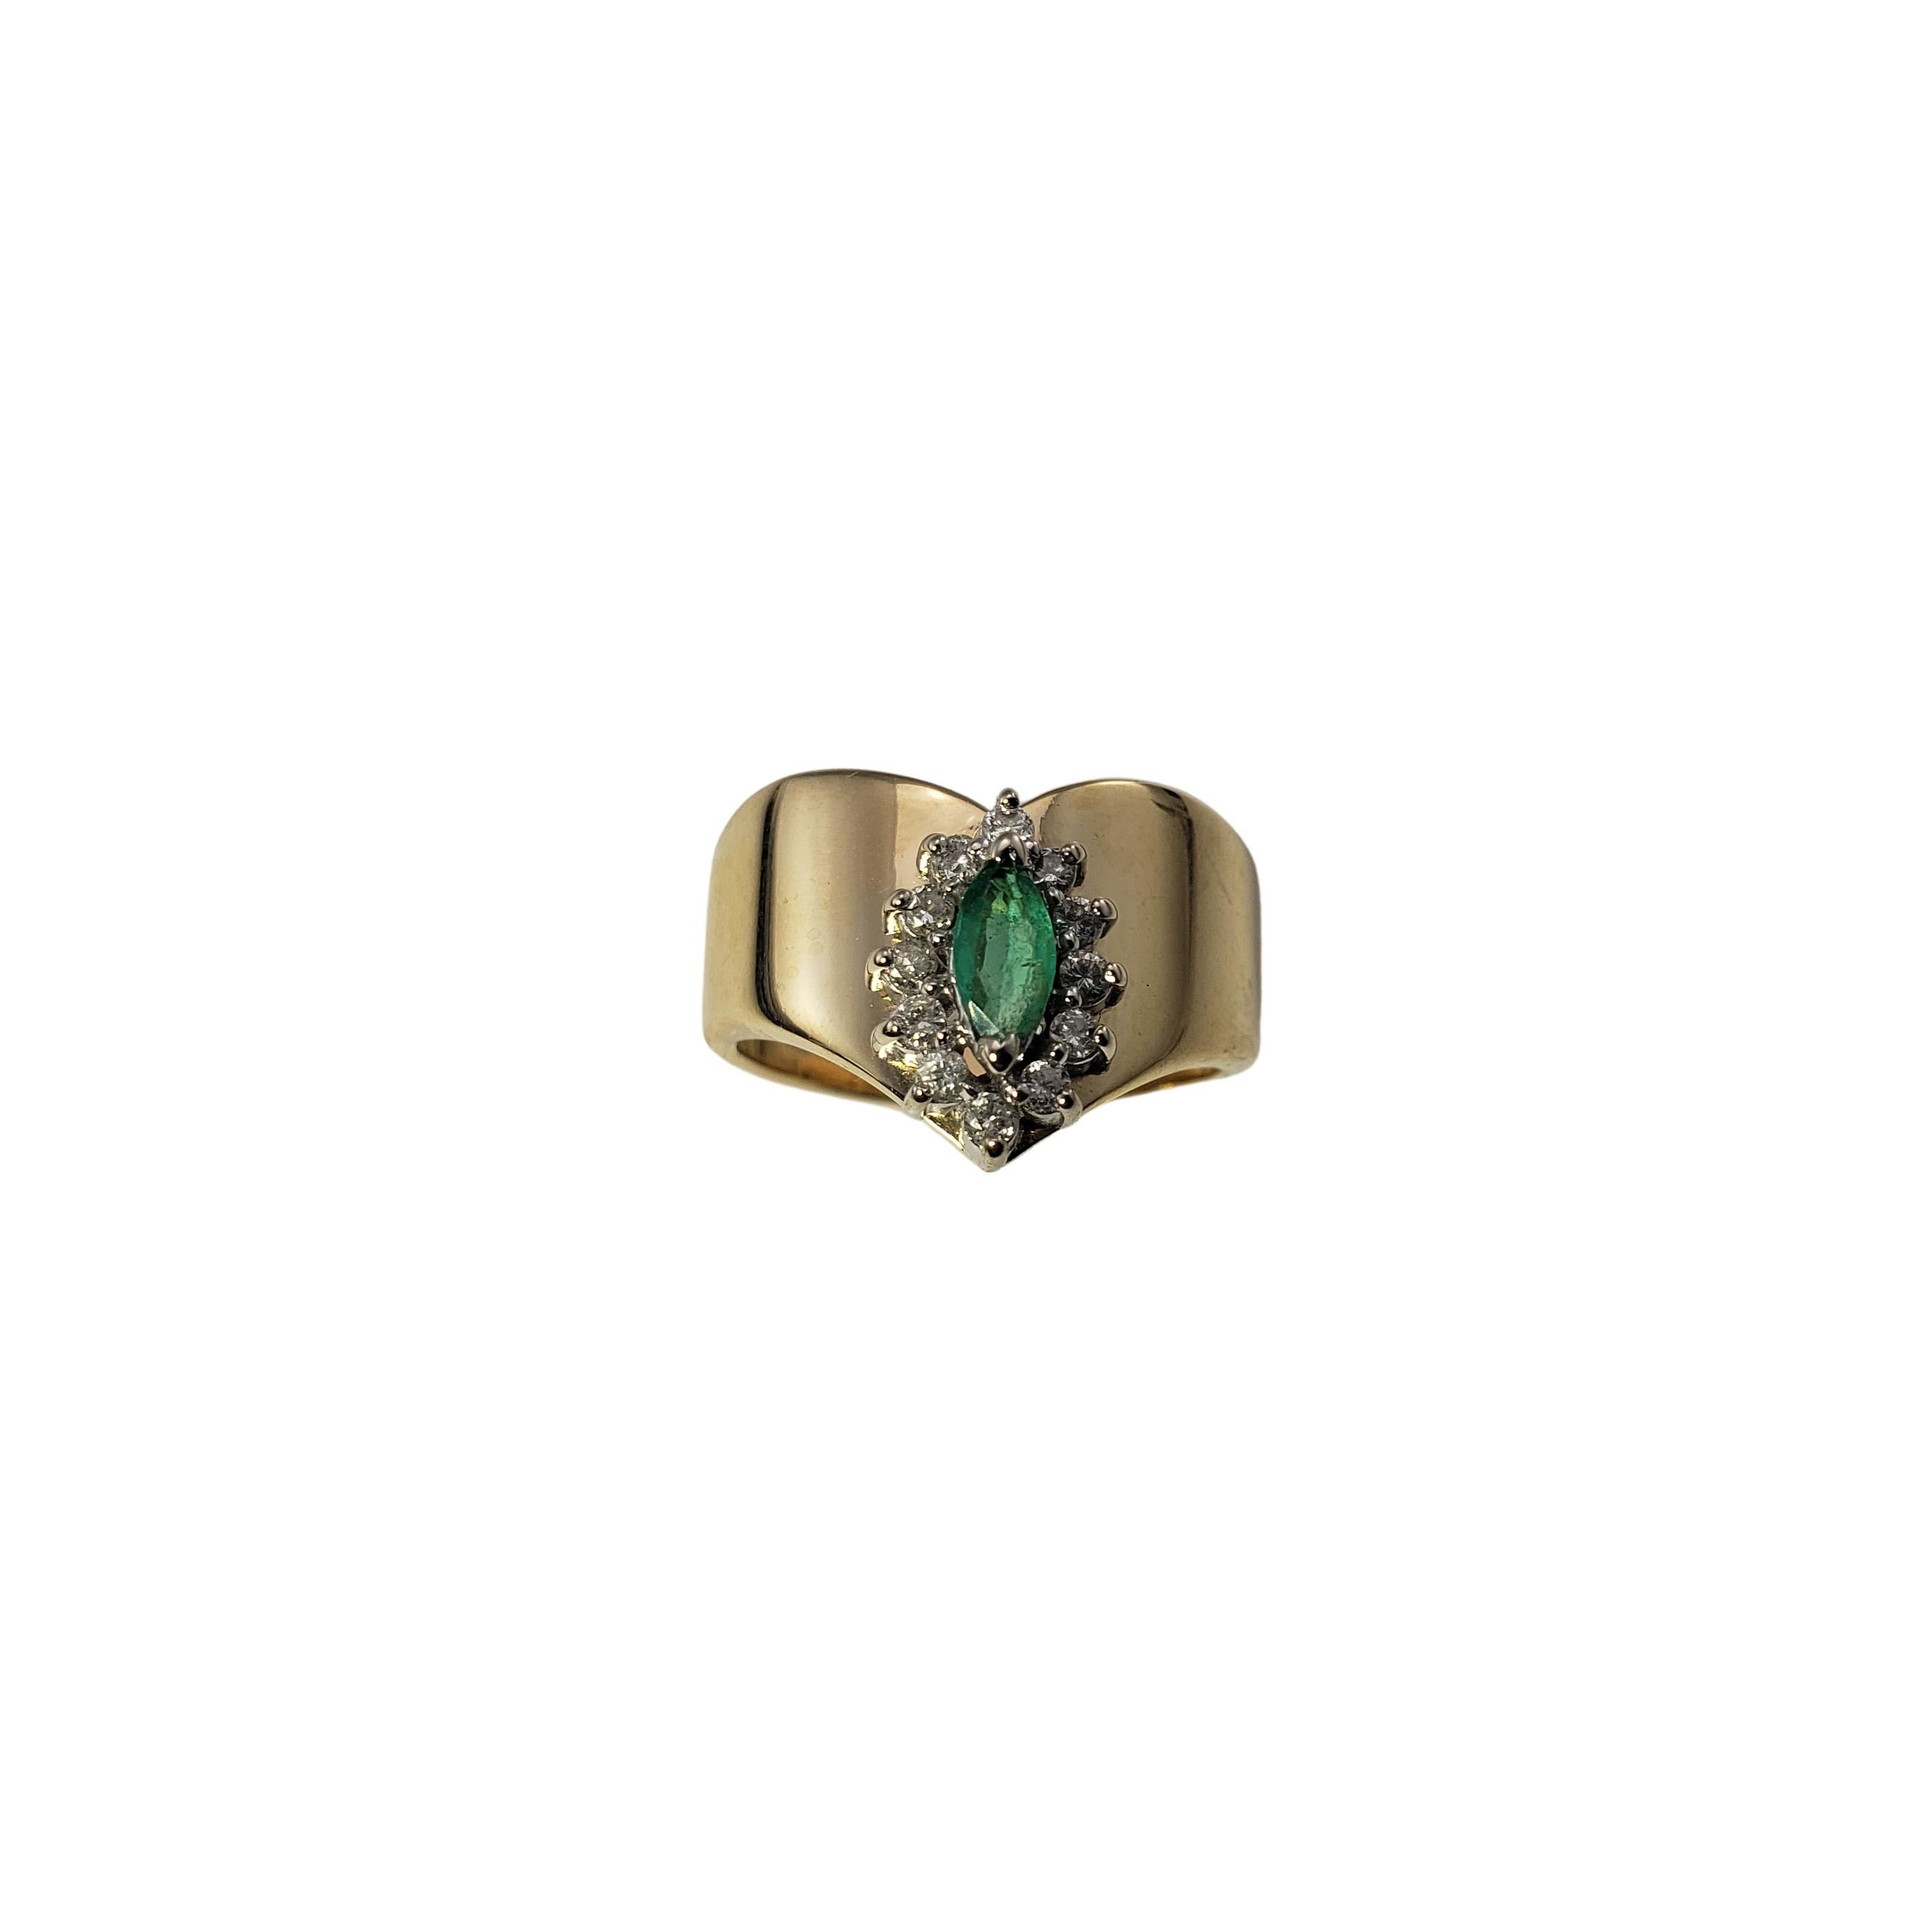 Vintage 14 Karat Yellow Gold Natural Emerald and Diamond Ring Size 8-

This lovely ring features one marquis emerald (8 mm x 4 mm) surrounded by 12 round brilliant cut diamonds set in classic 14K yellow gold. Width: 13 mm. Shank: 4 mm.

Emerald has